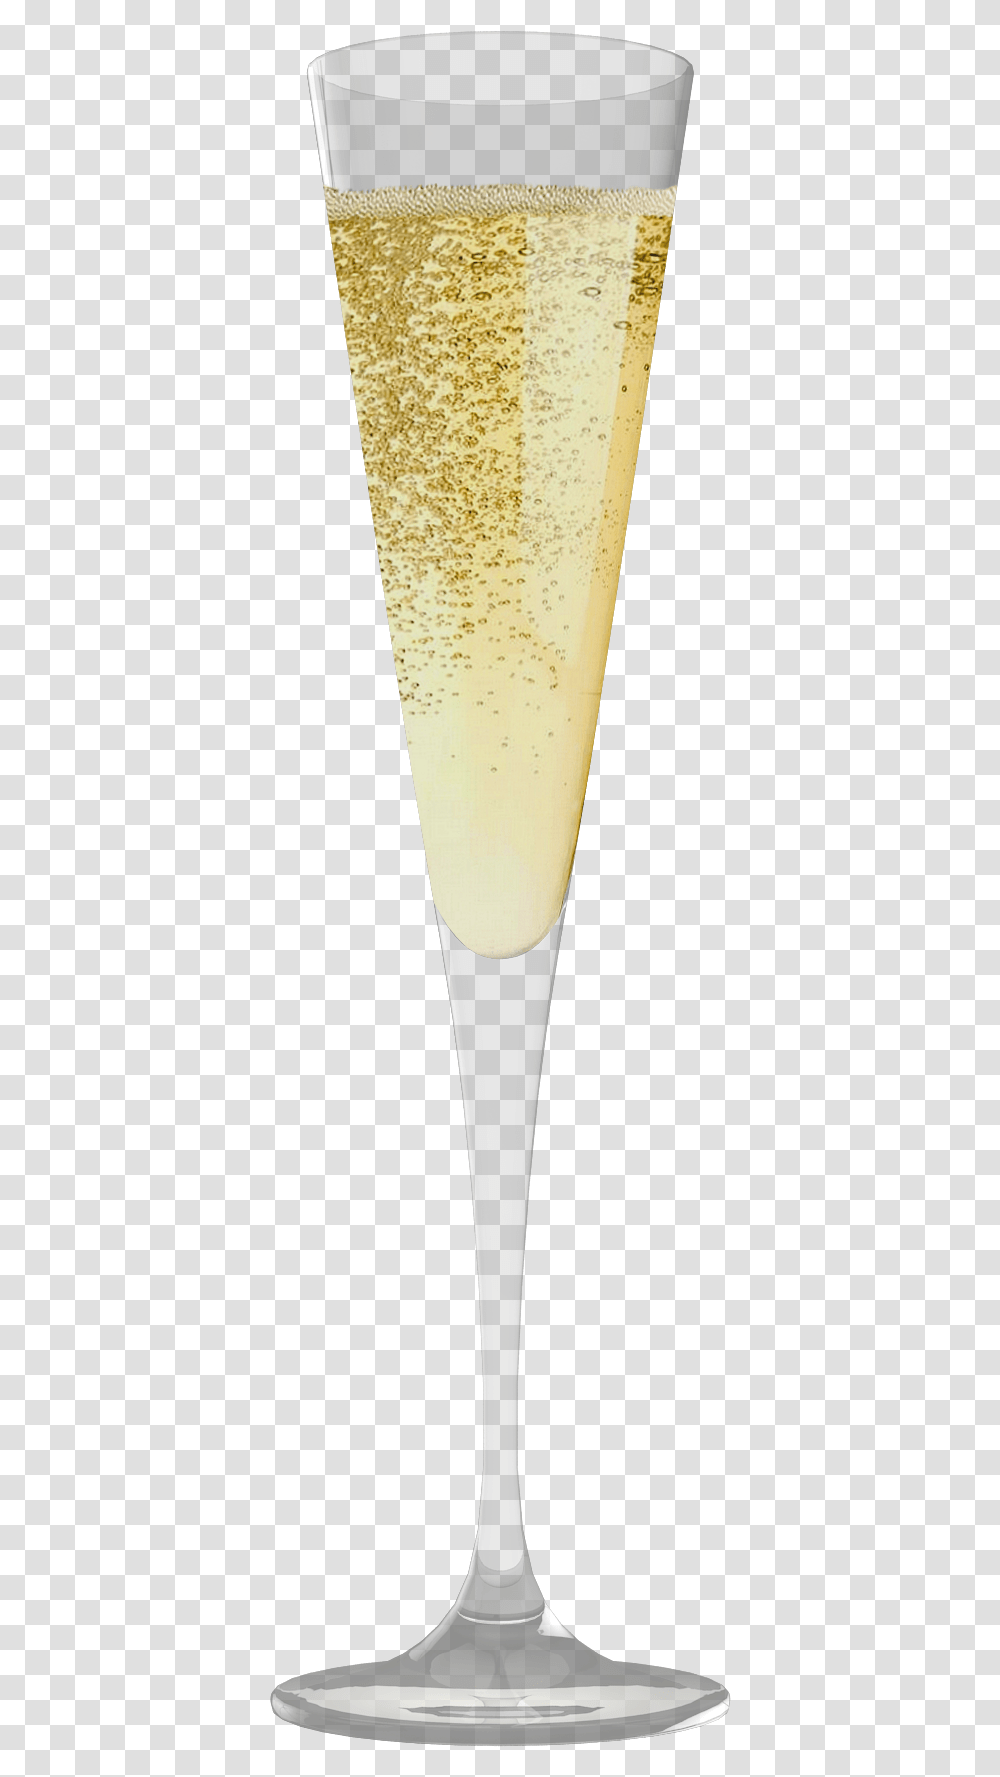 Champagne Glass Clip Art Champagne Classic, Beverage, Spoon, Juice, Cocktail Transparent Png